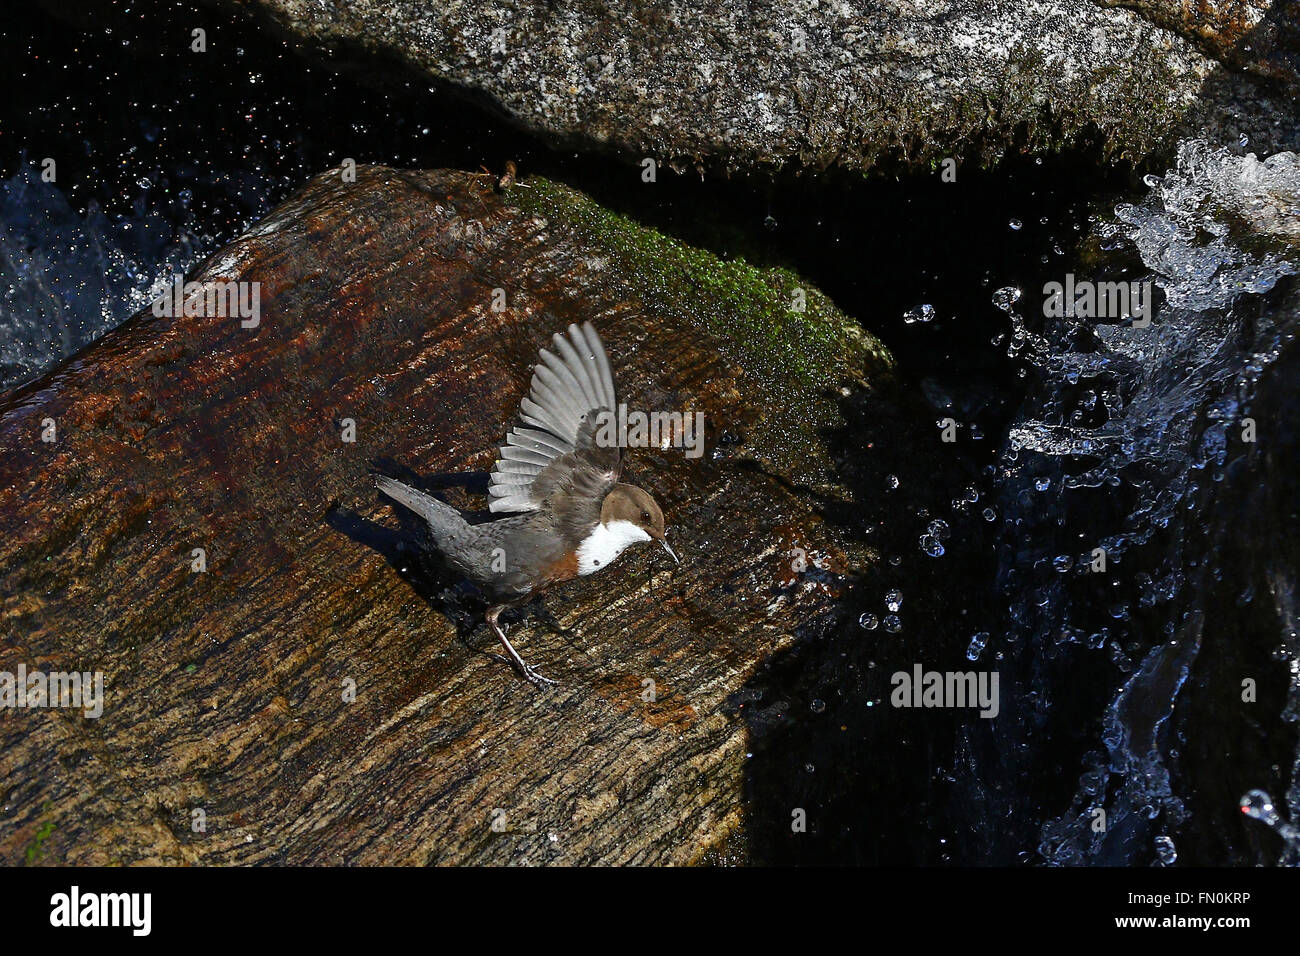 White-throated dipper, Cinclus Cinclus, carrying nest material in front of waterfall Stock Photo